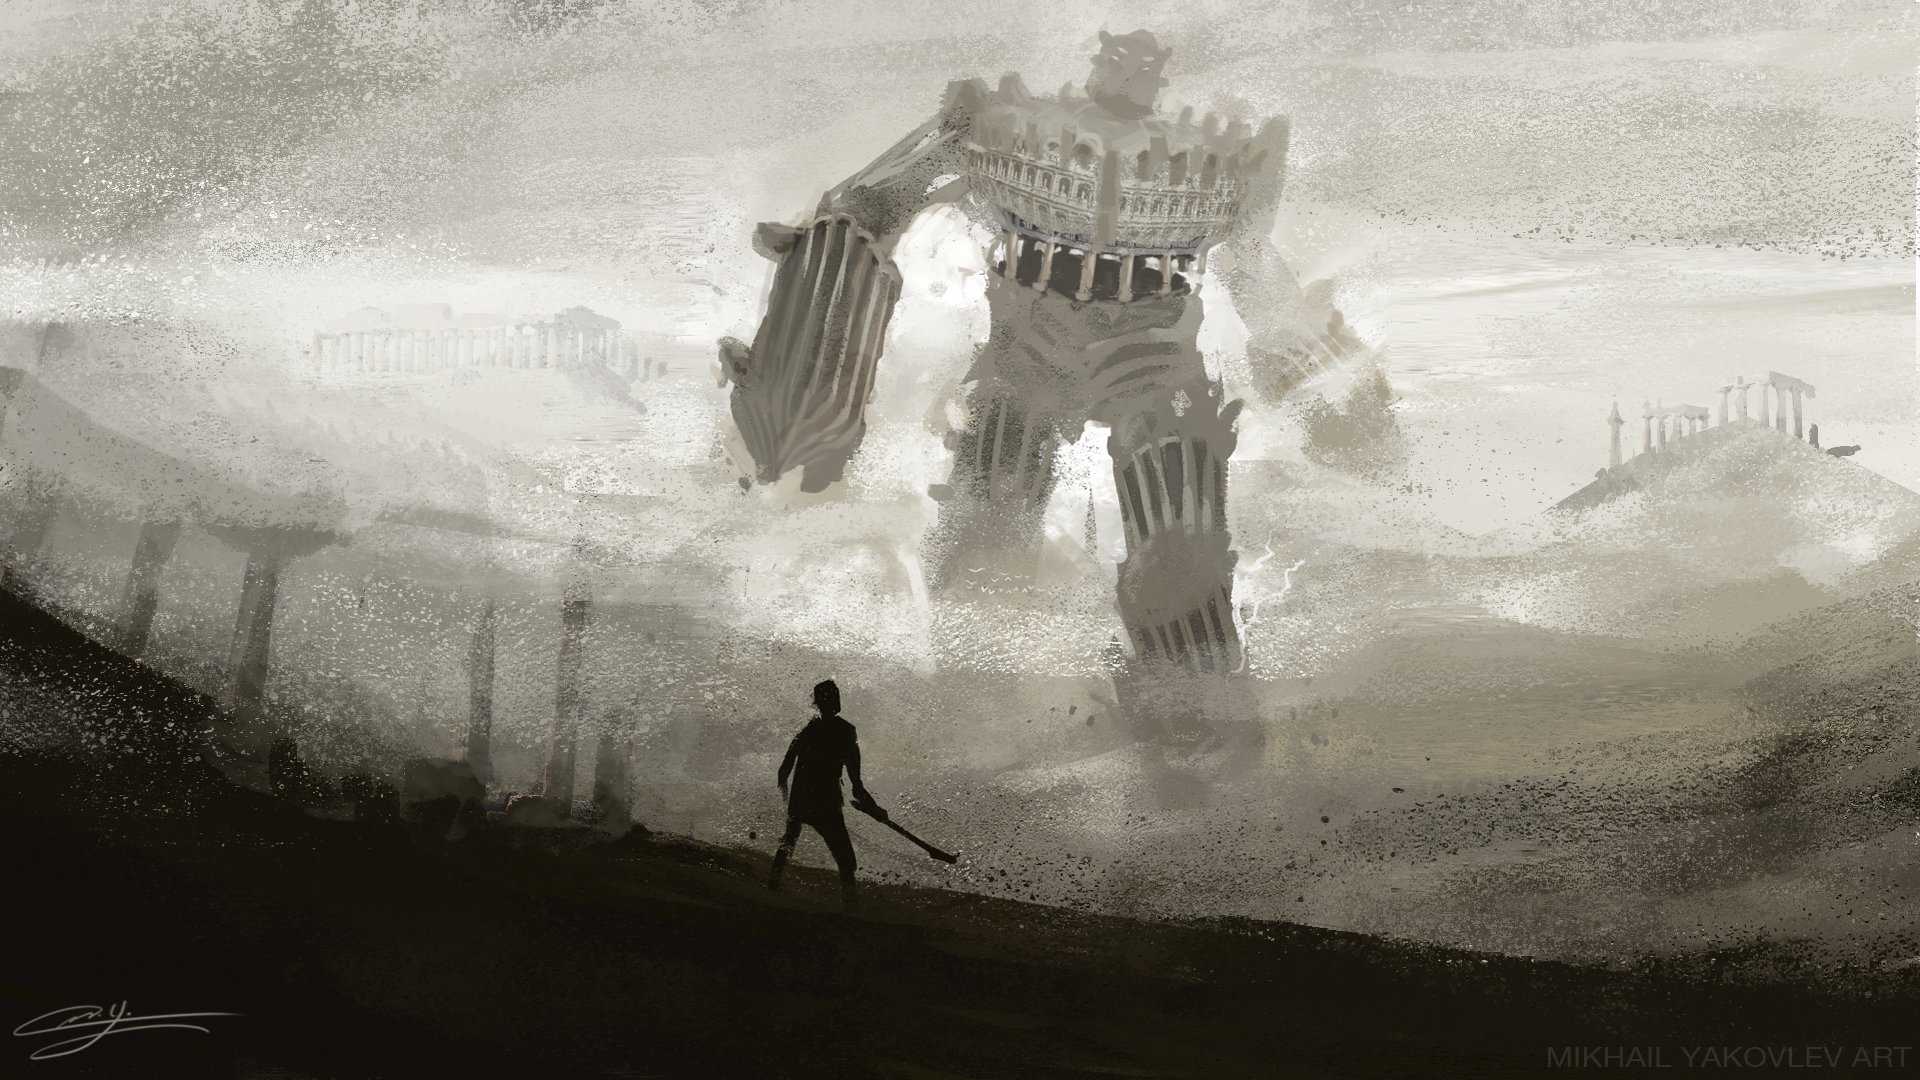 download shadow of the colossus pc full version